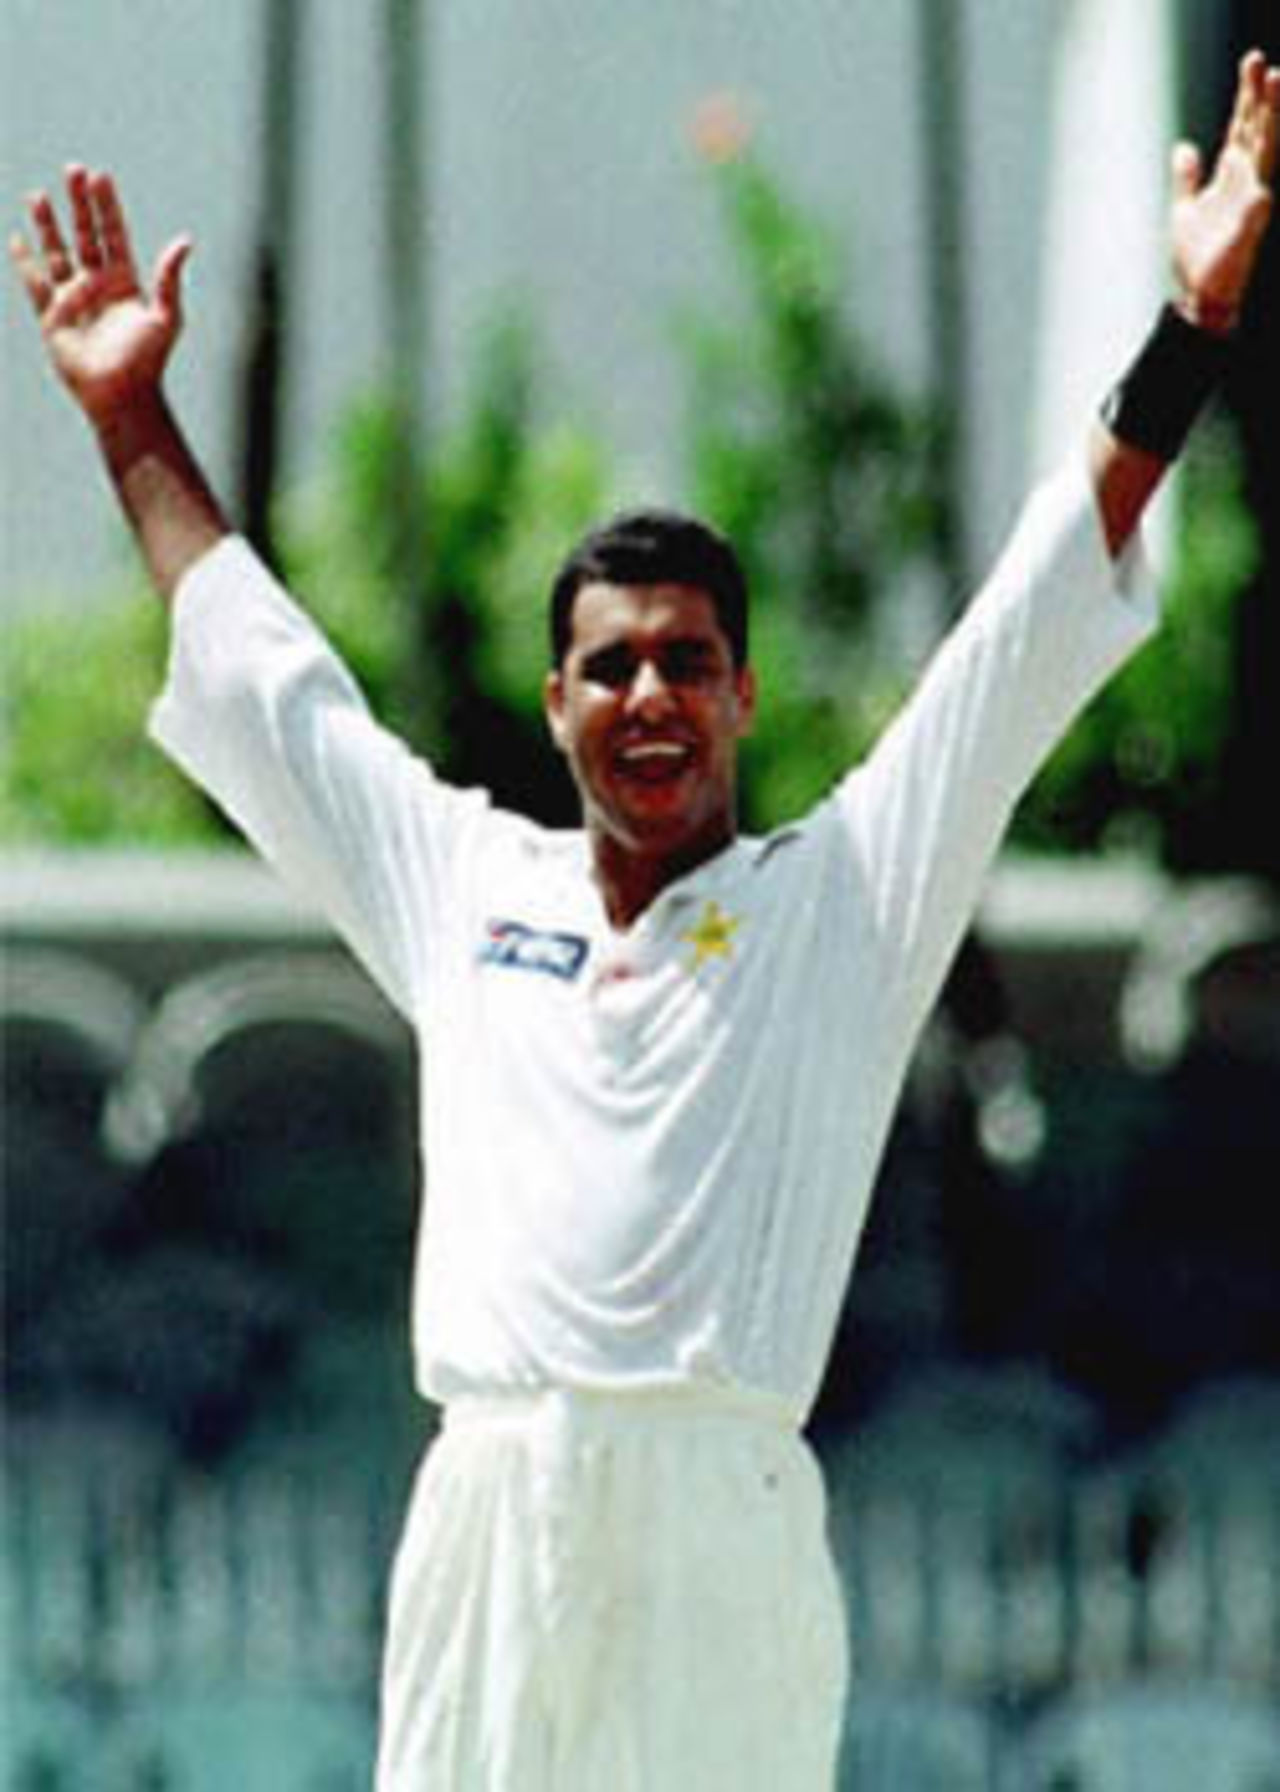 Pakistan bowler Waqar Younis celebrates his 300th Test Wicket after dismissing Sri Lanka's Muttiah Muralitharan. Sri Lanka were all out for 273 on the second day of the first test. Pakistan in Sri Lanka, 1999/00, 1st Test, Sri Lanka v Pakistan, Sinhalese Sports Club Ground, Colombo, 14-18 June 2000 (Day 2).